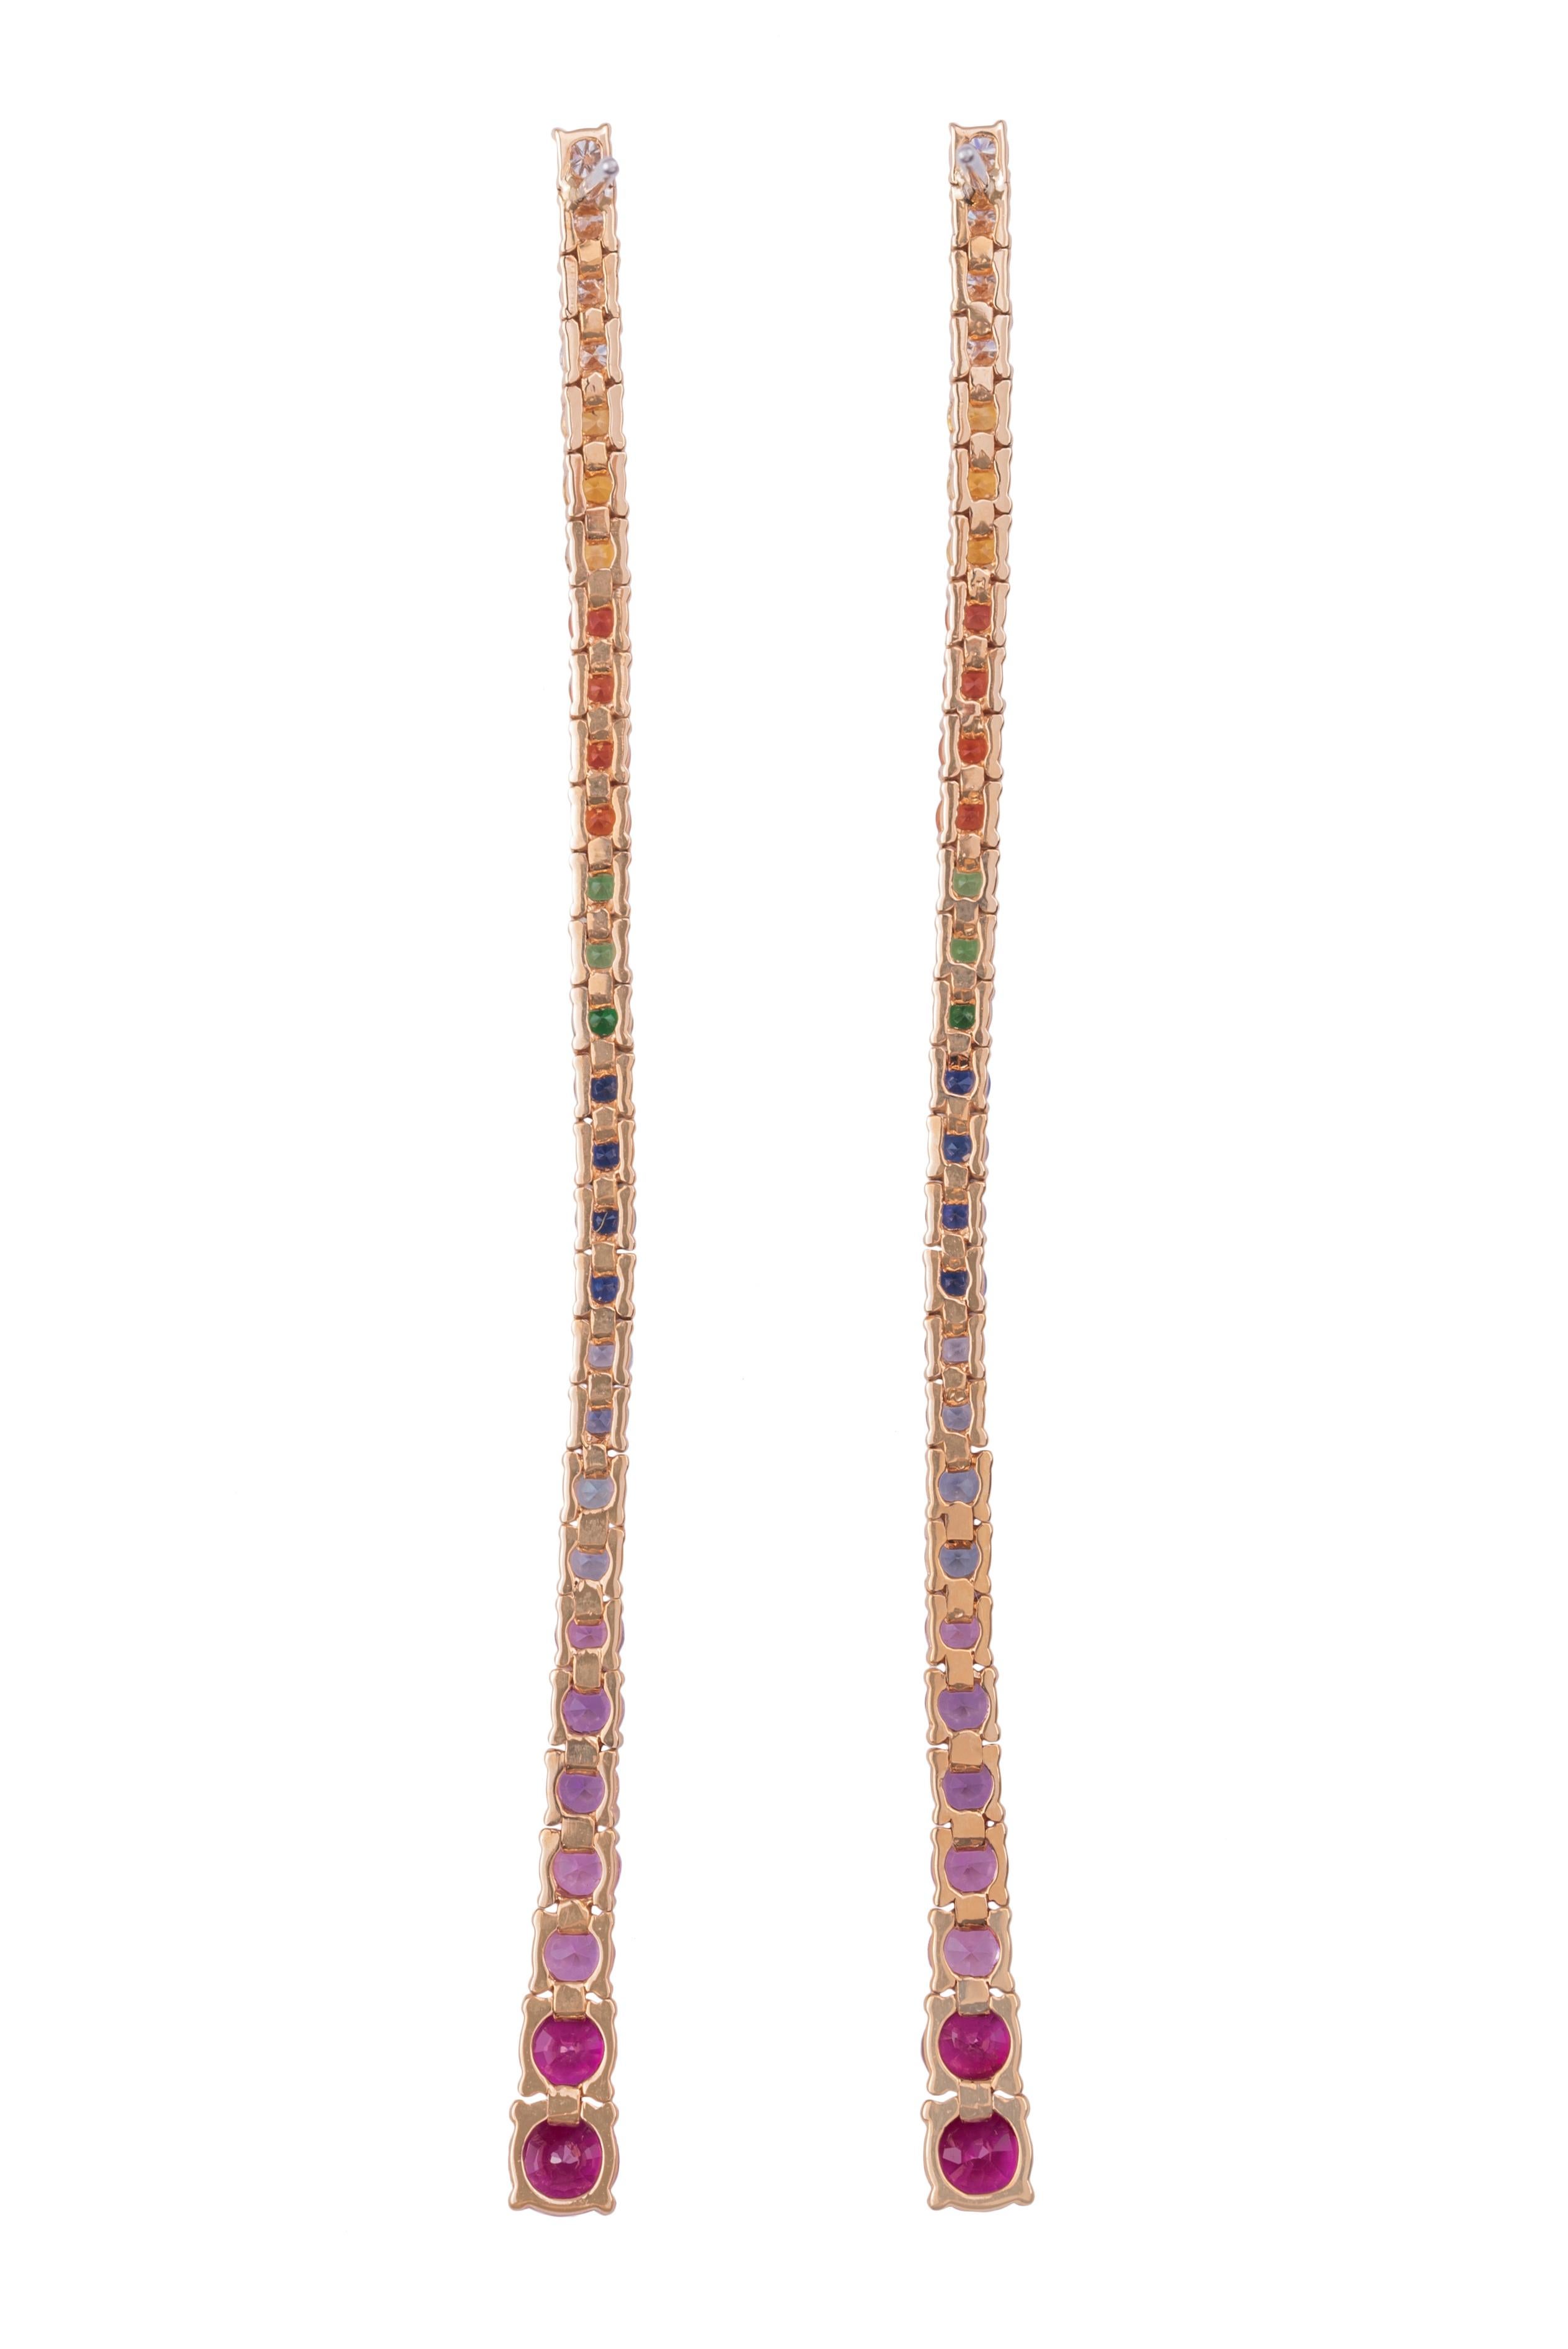 Contemporary Stud Back Multi Color Tennis Earrings with Brilliant Cut Diamonds and Sapphires